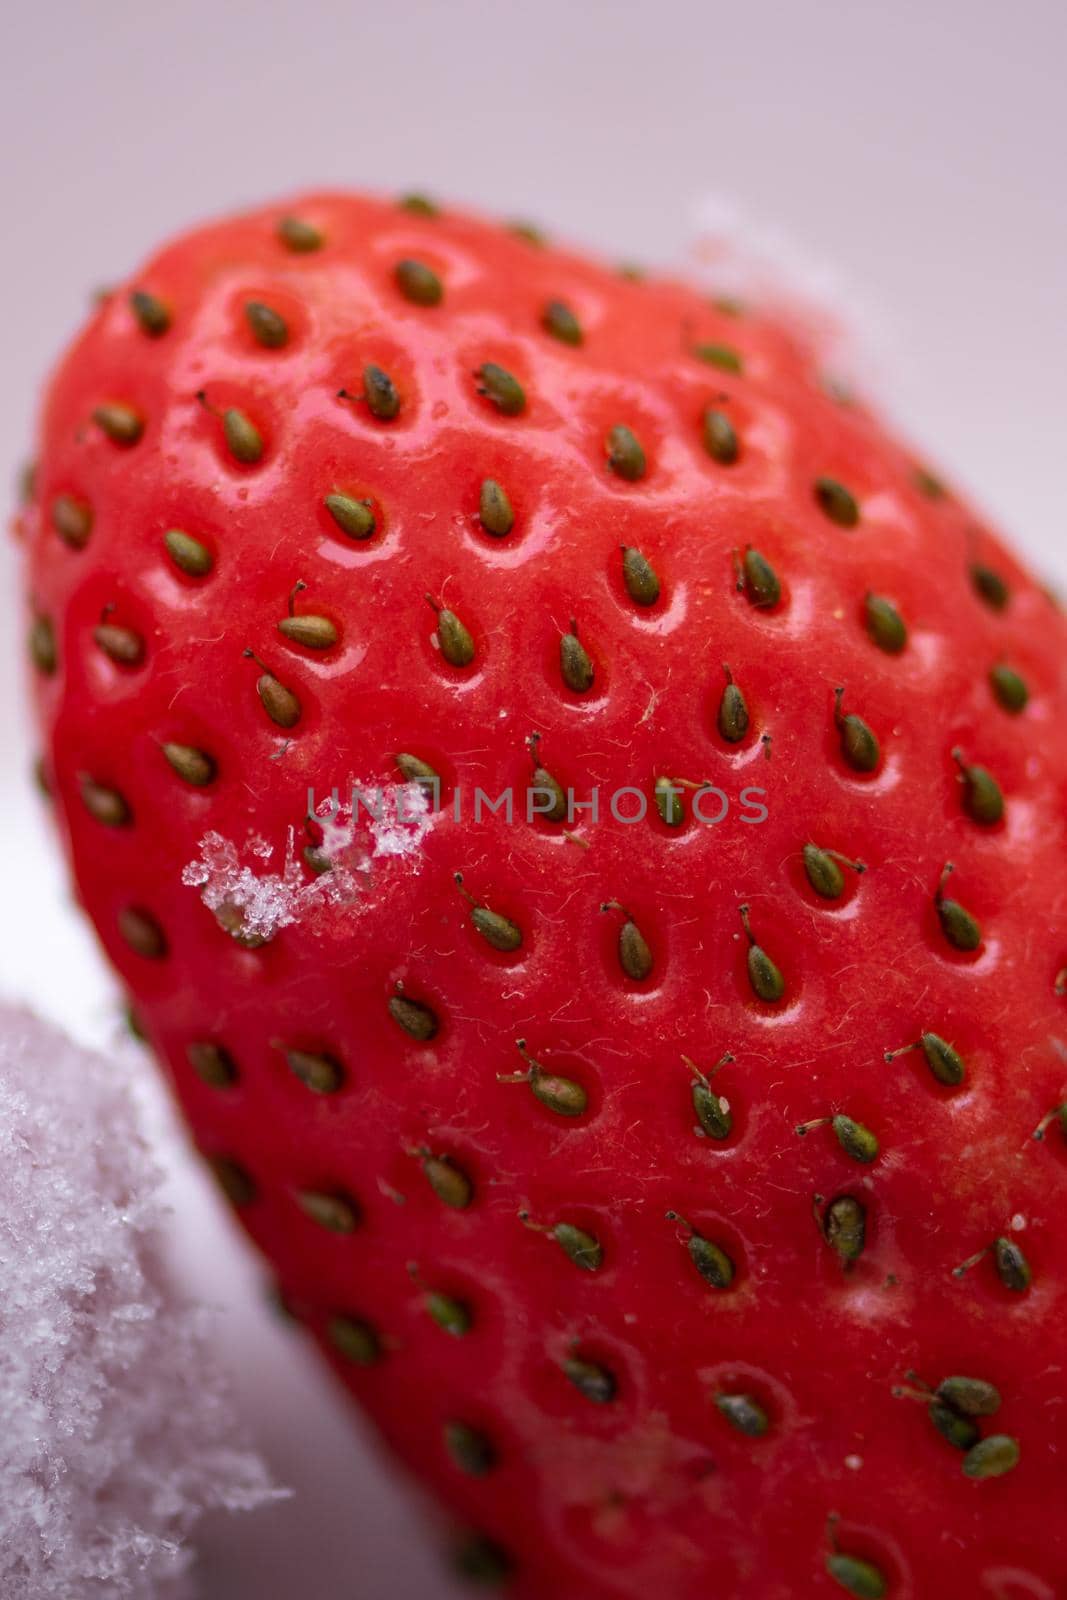 Macro view of the seeds of the ripe red strawberry and a piece of ice on it on a white background by wektorygrafika